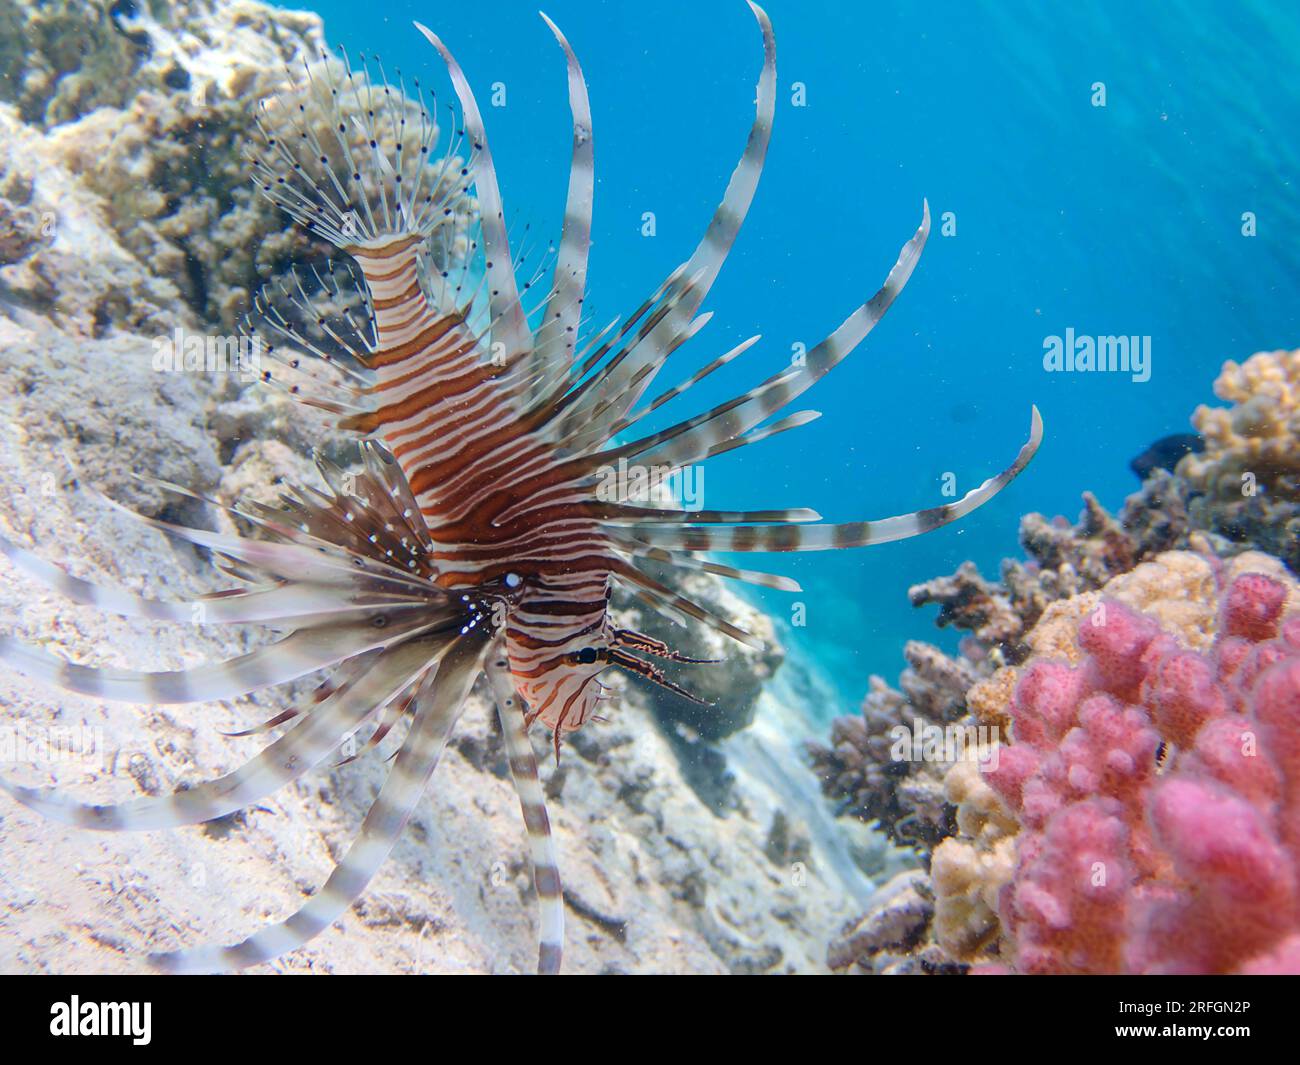 Lionfish (Pterois volitans) in the Red Sea, underwater photography Stock Photo